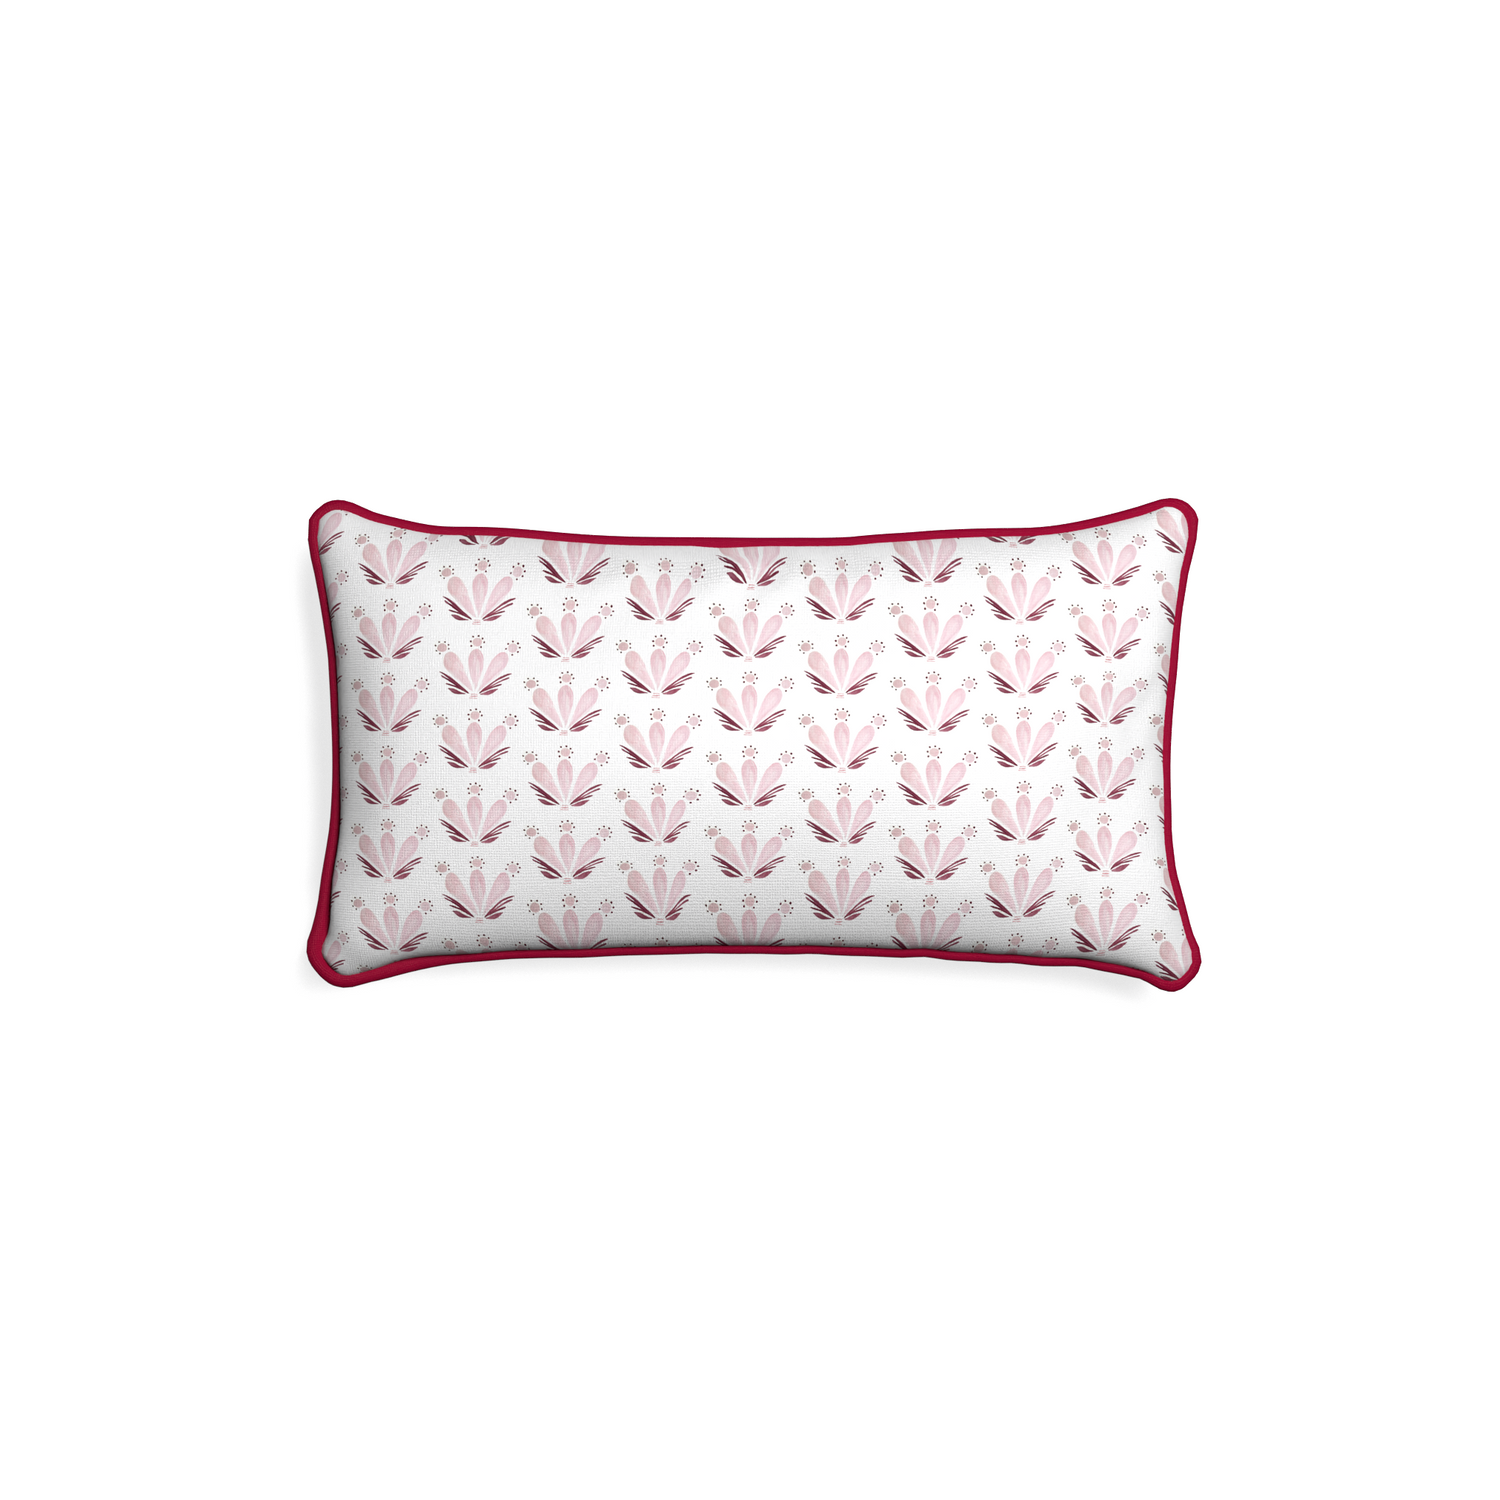 Petite-lumbar serena pink custom pink & burgundy drop repeat floralpillow with raspberry piping on white background